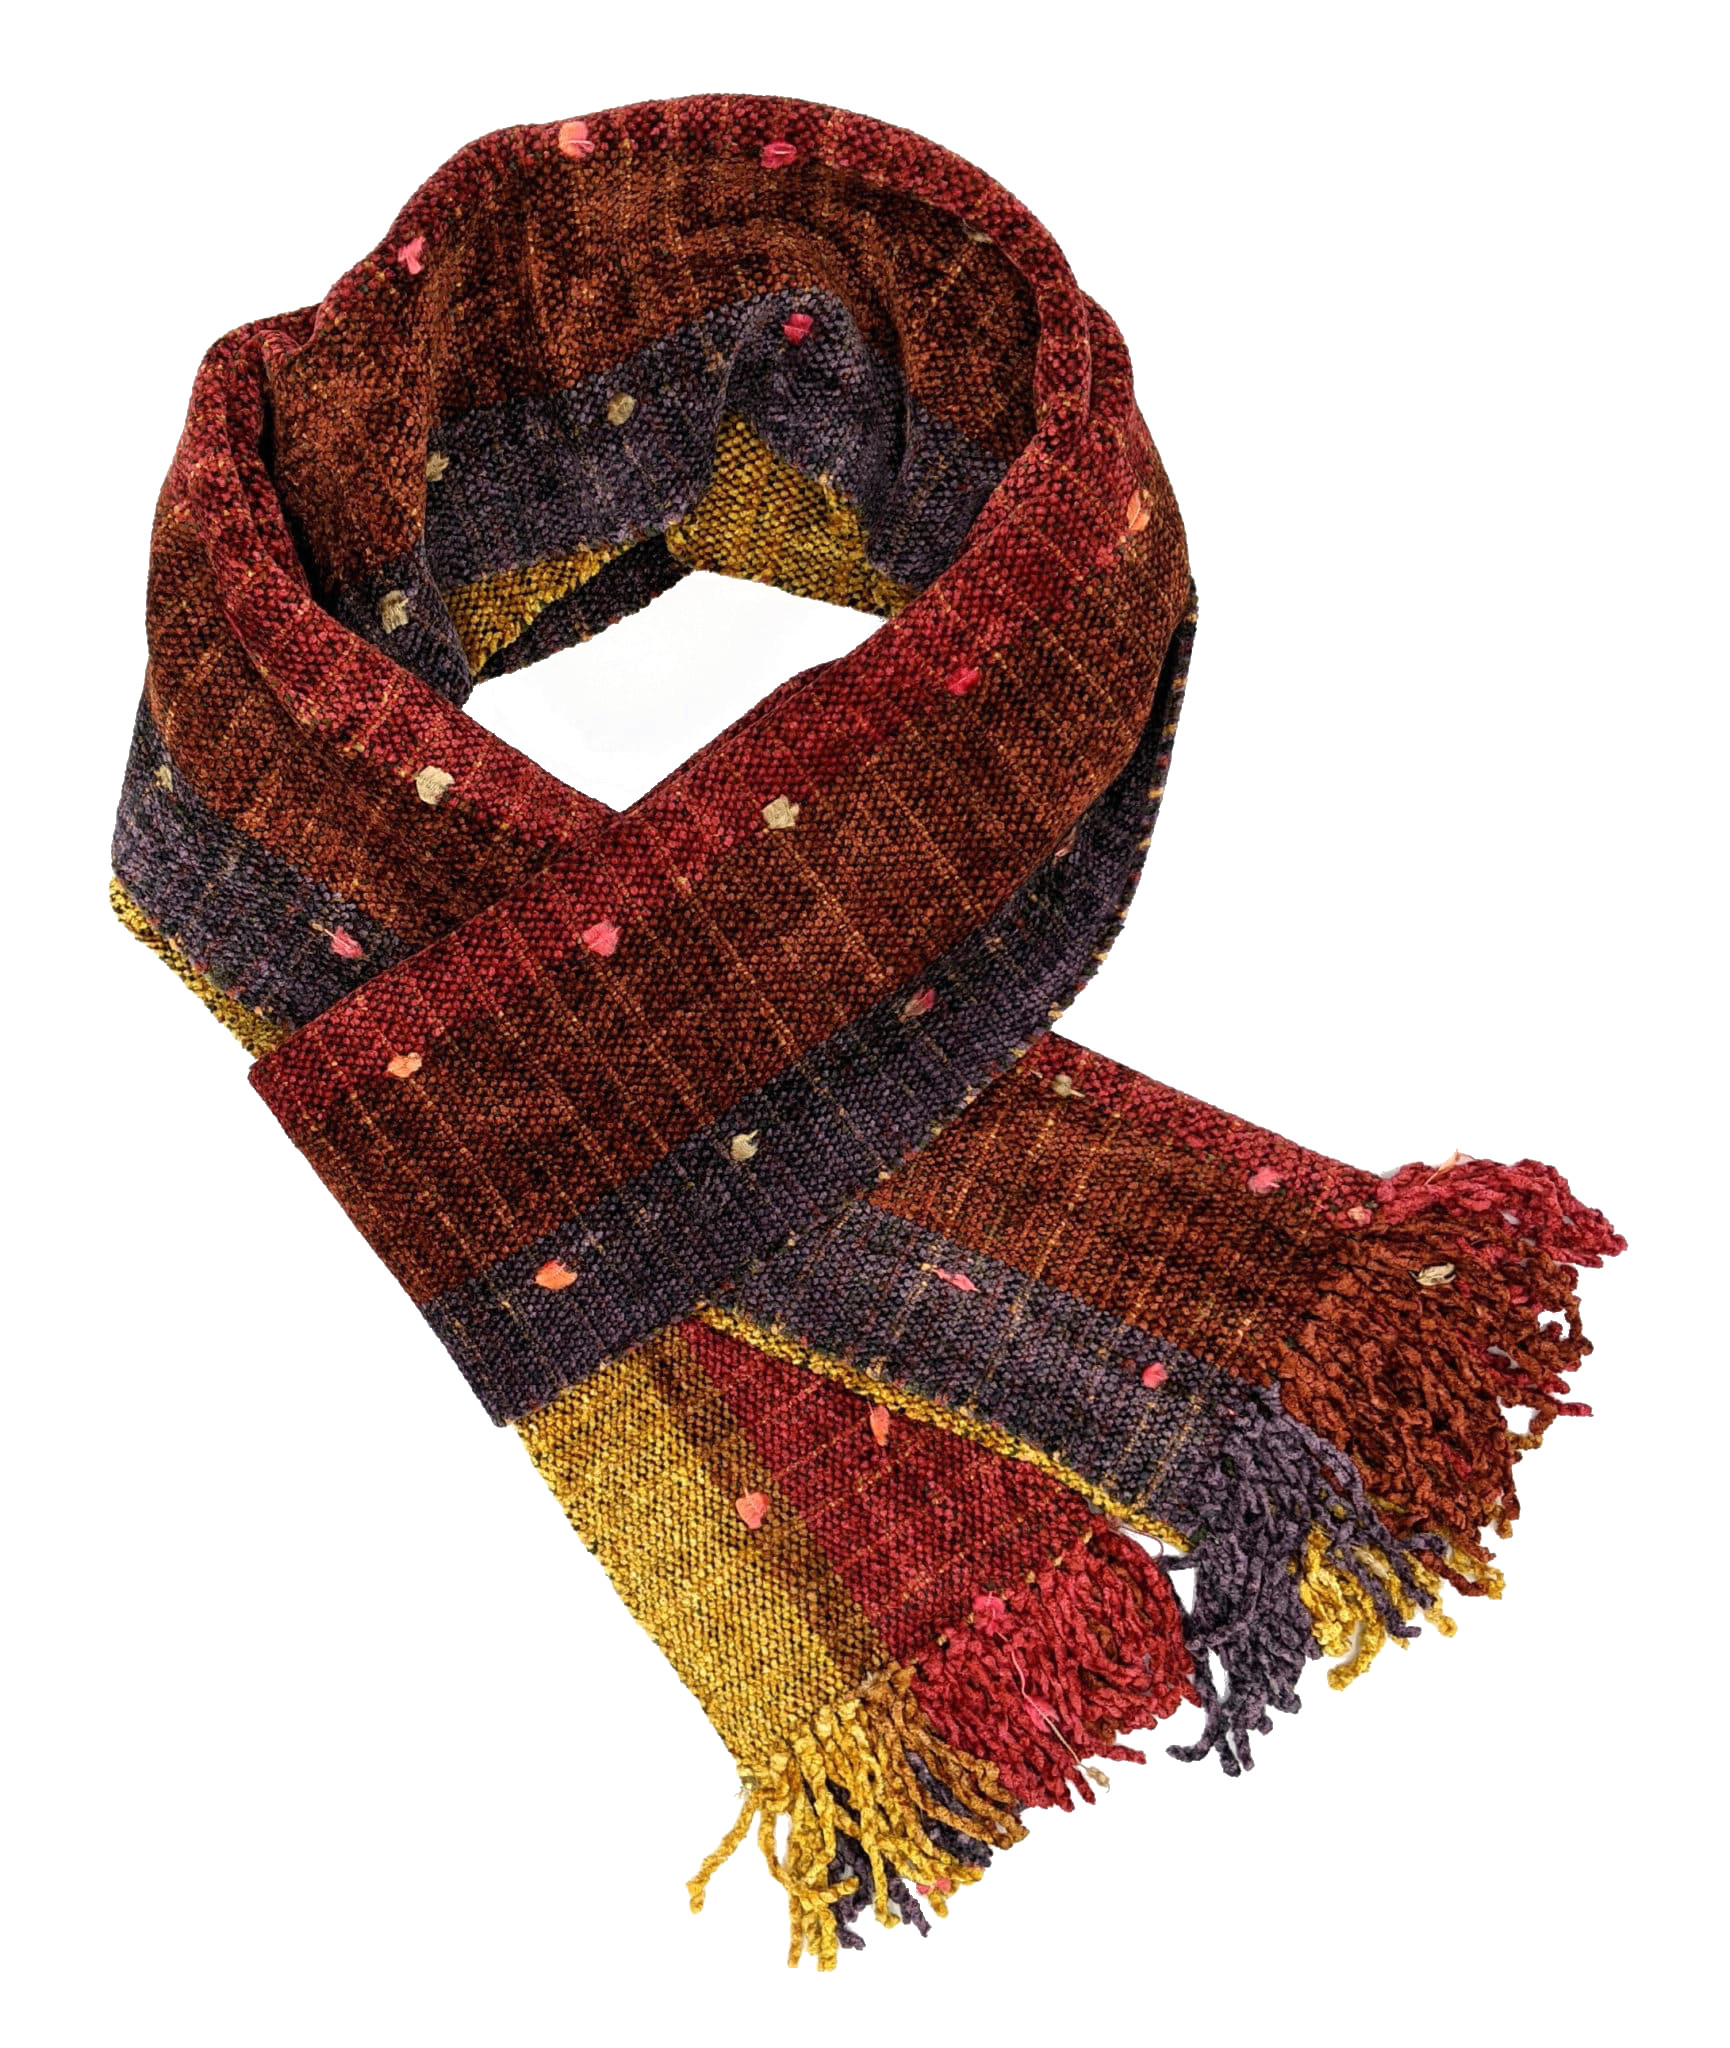 Purple, Cinnamon, Red, Coffee and Gold Stripes with Ornamental Yarn and Space-Dyed Autumn Warp Bamboo Chenille Handwoven Scarf 8 x 68